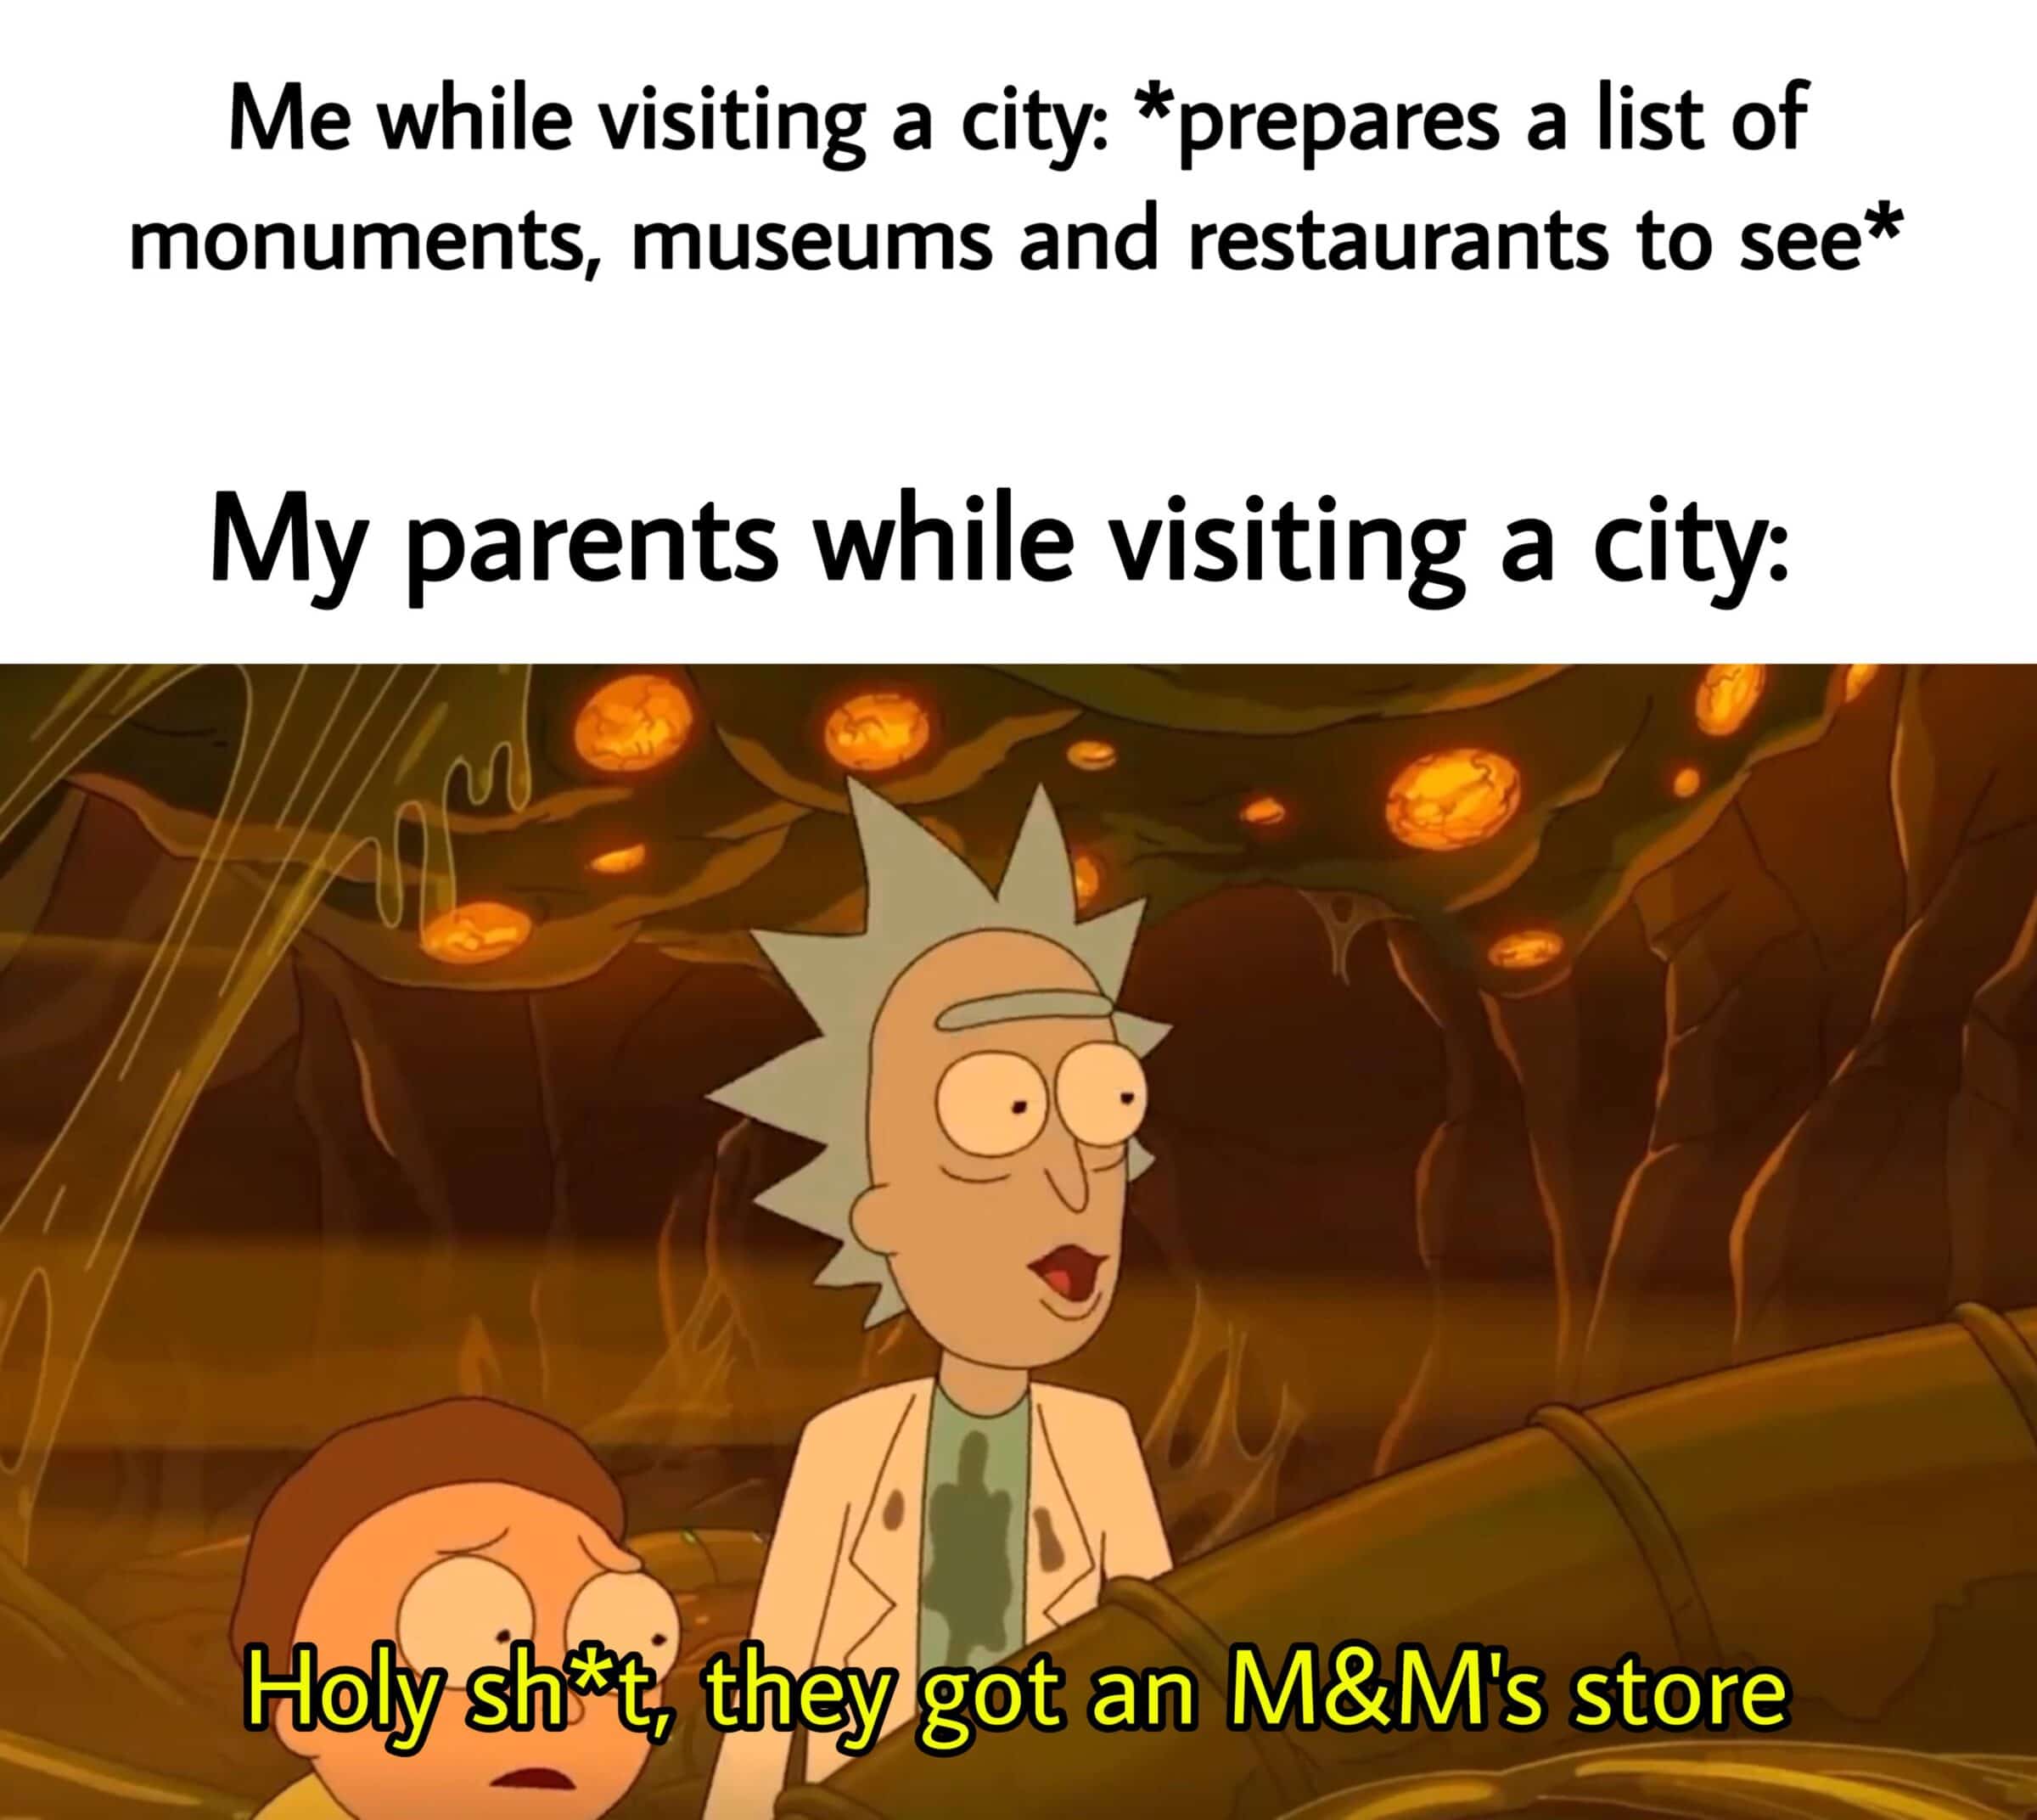 Cute, London, RickandMorty, Las Vegas, Sunday, NYC Dank Memes Cute, London, RickandMorty, Las Vegas, Sunday, NYC text: Me while visiting a city: *prepares a list of monuments, museums and restaurants to see* My parents while visiting a city: Holy shi* t, they got an M&M's store 